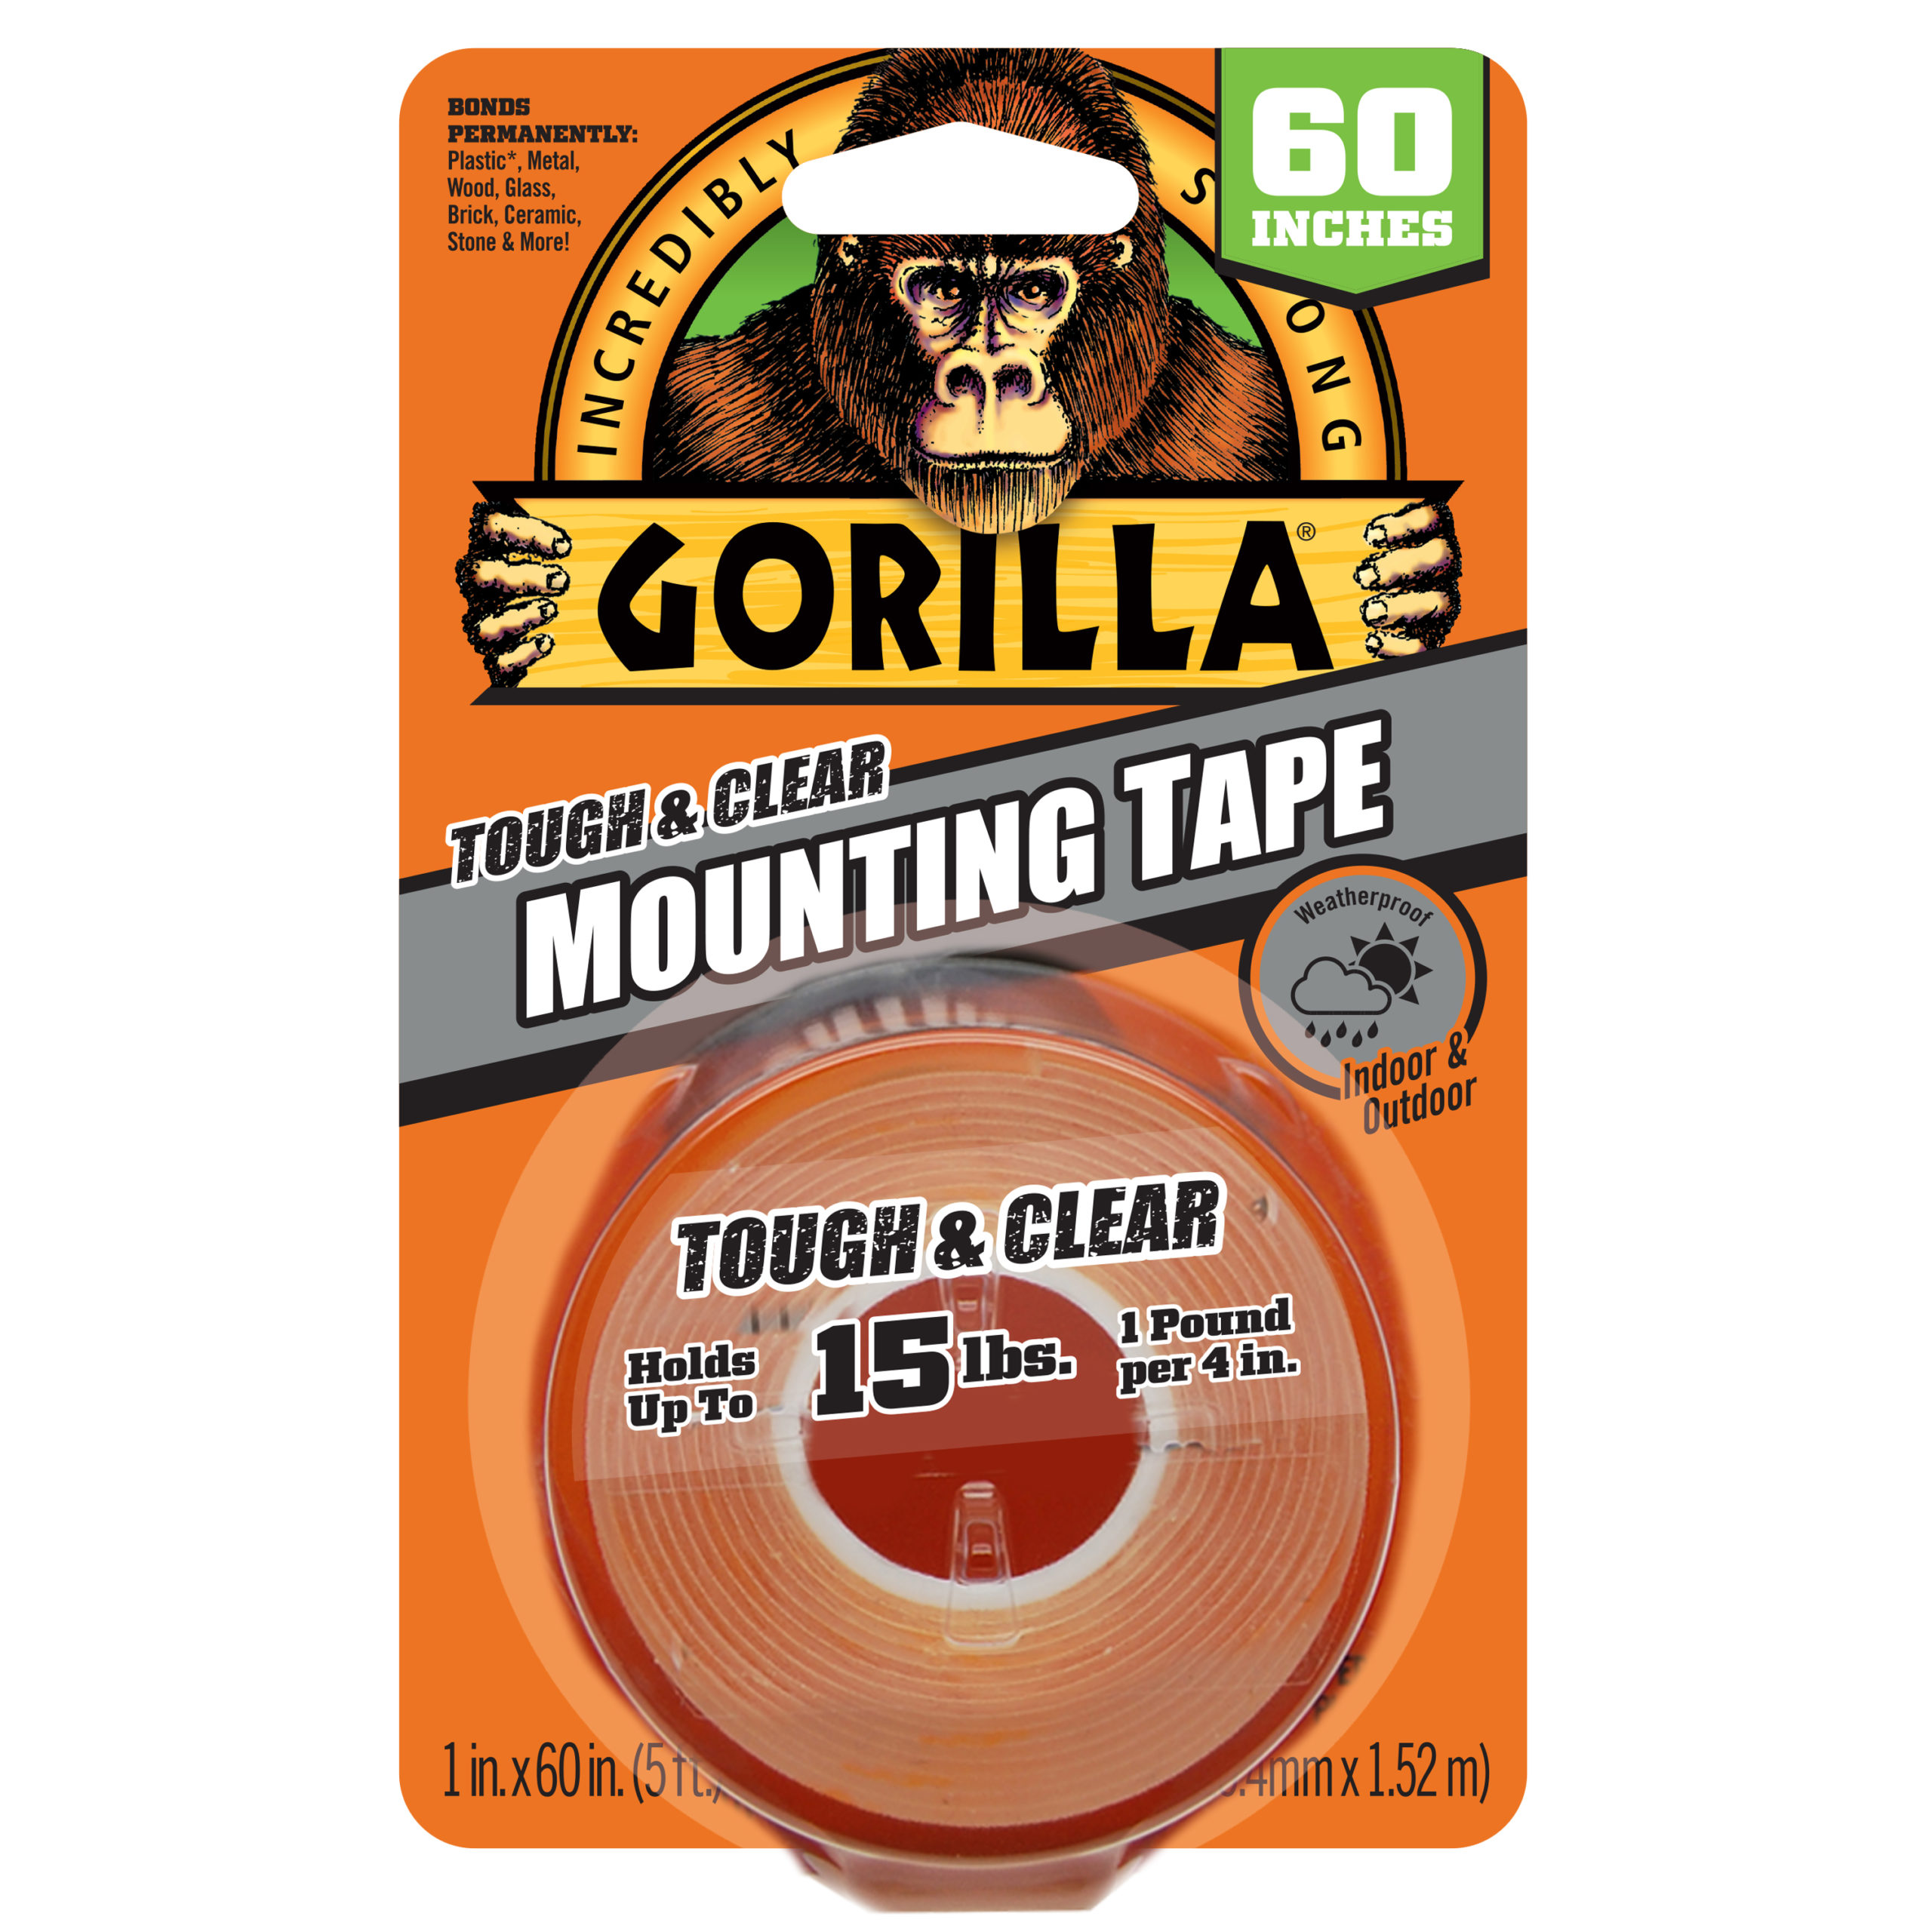 Gorilla Glue Tape Waterproof Patch & Seal Strong Rubber Adhesive Permanent Bond 